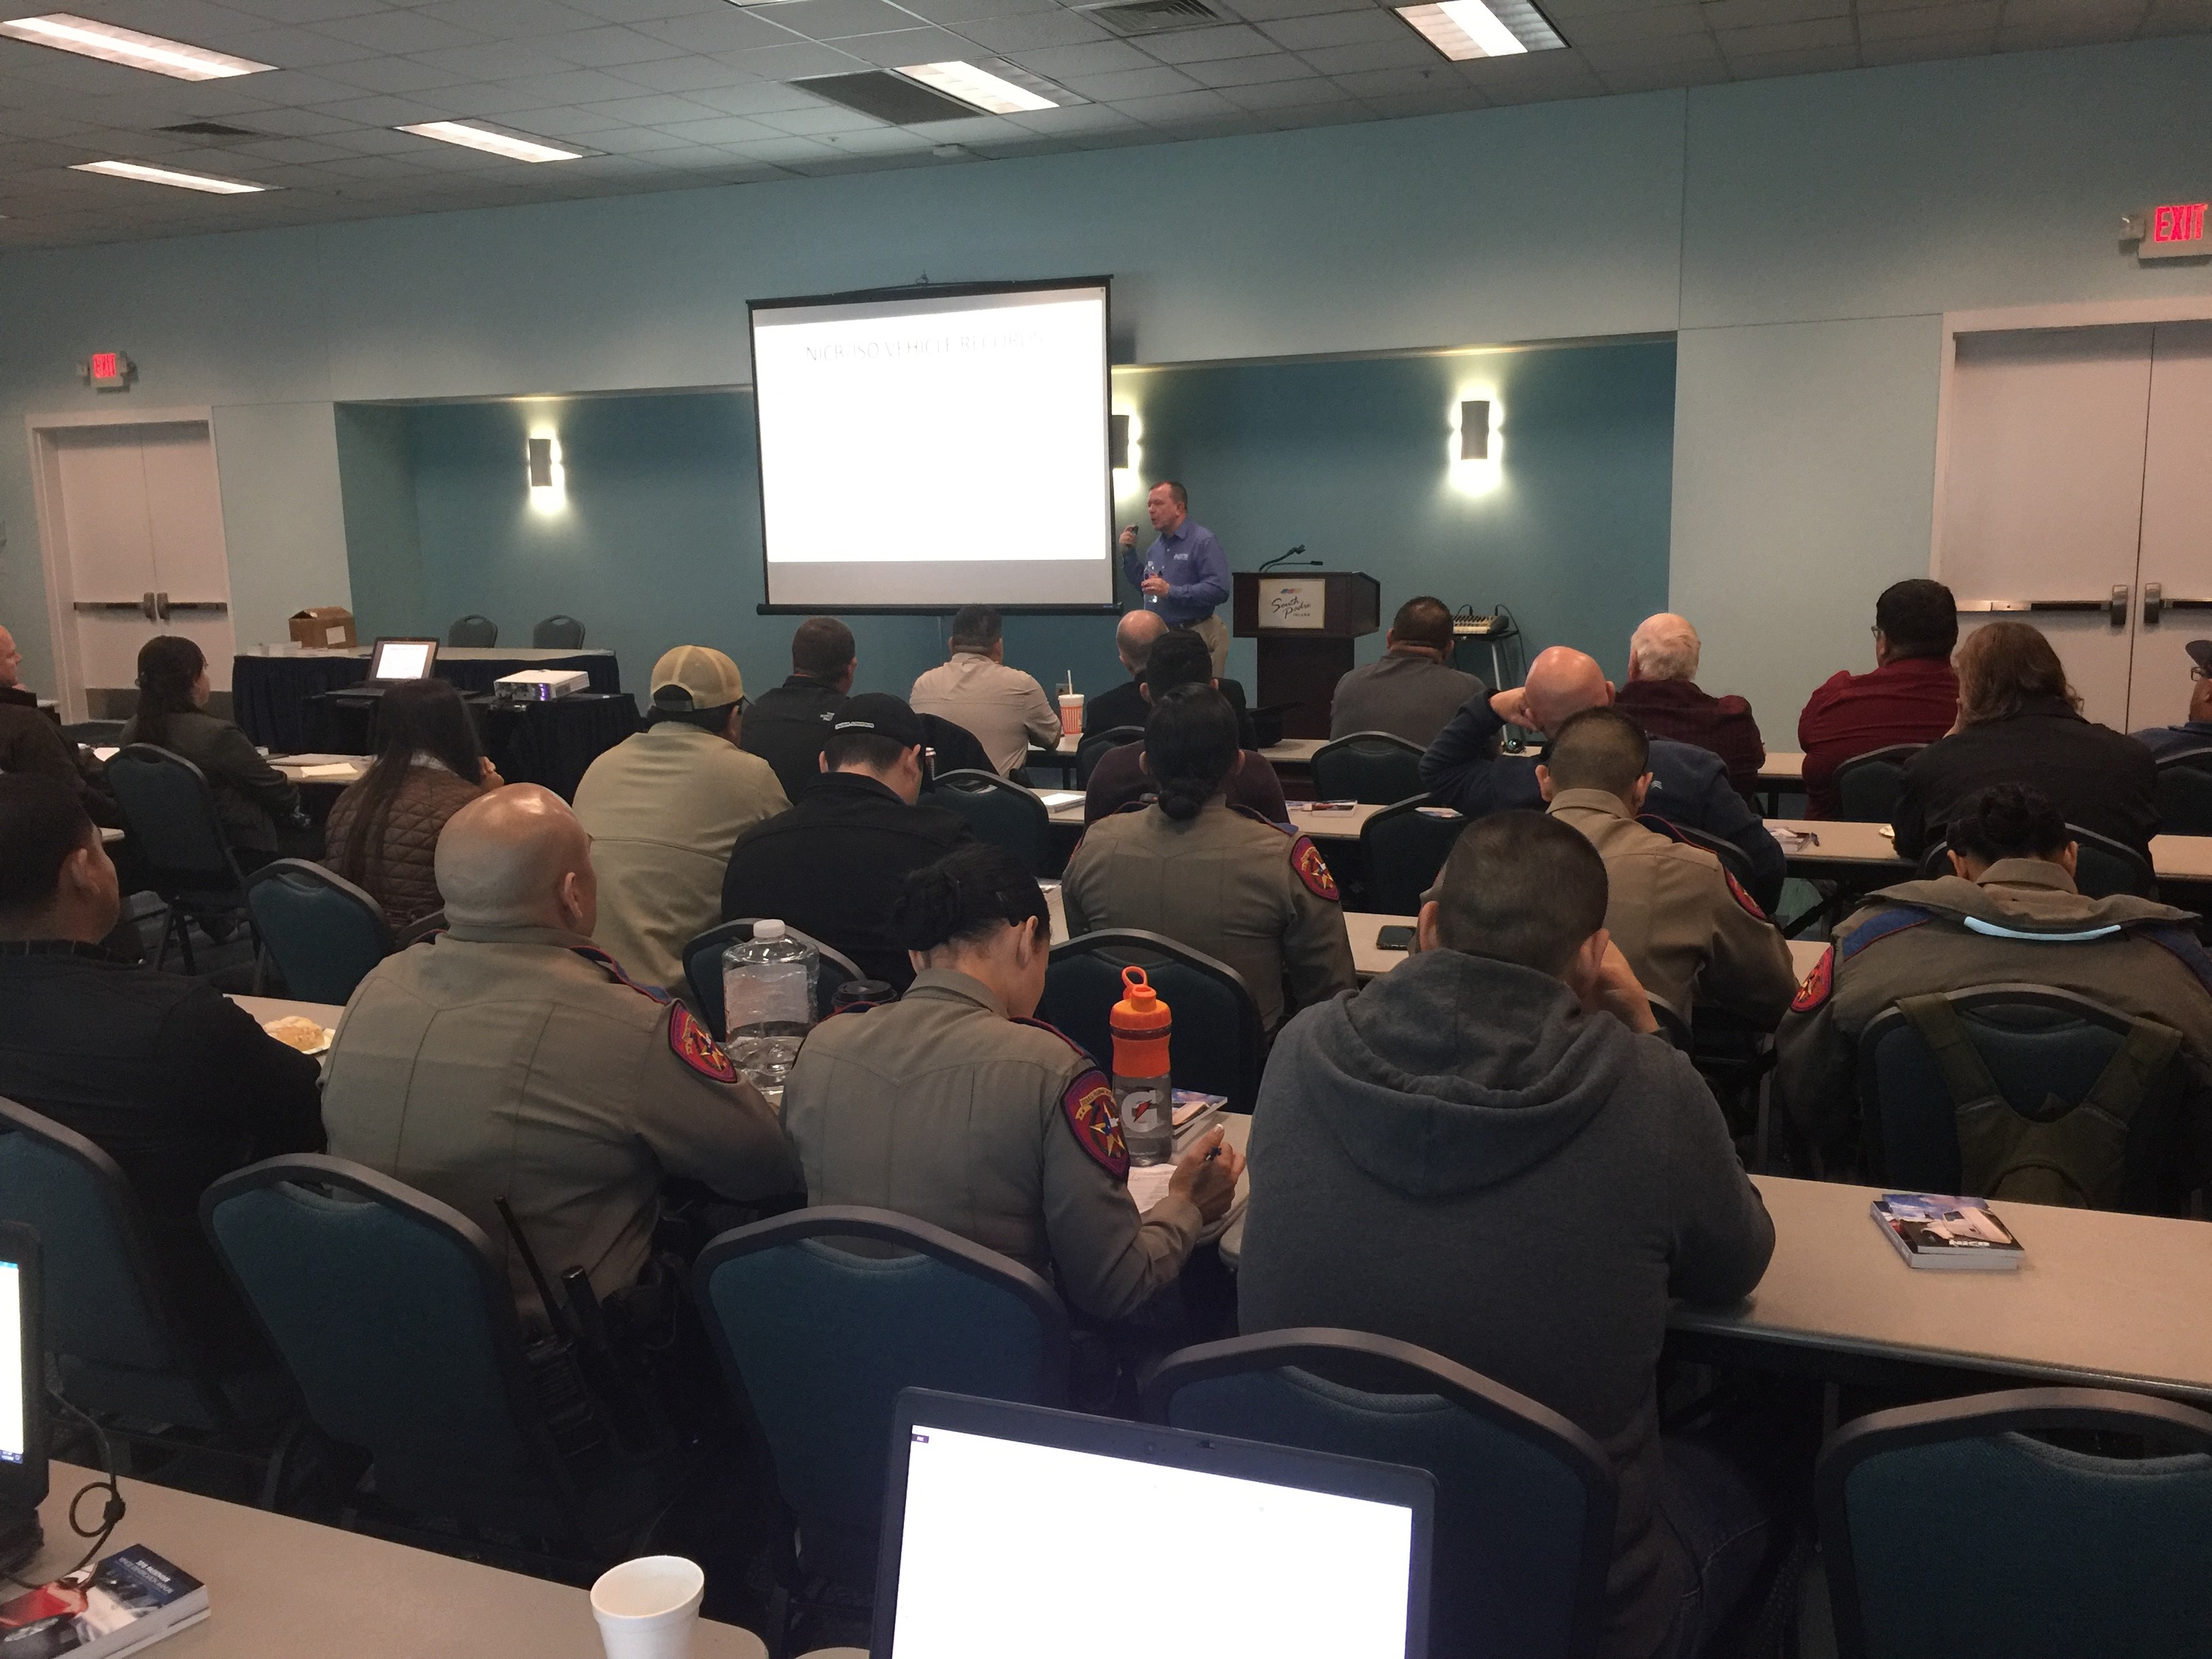 Training being conducted at the Padre Island Convention Center